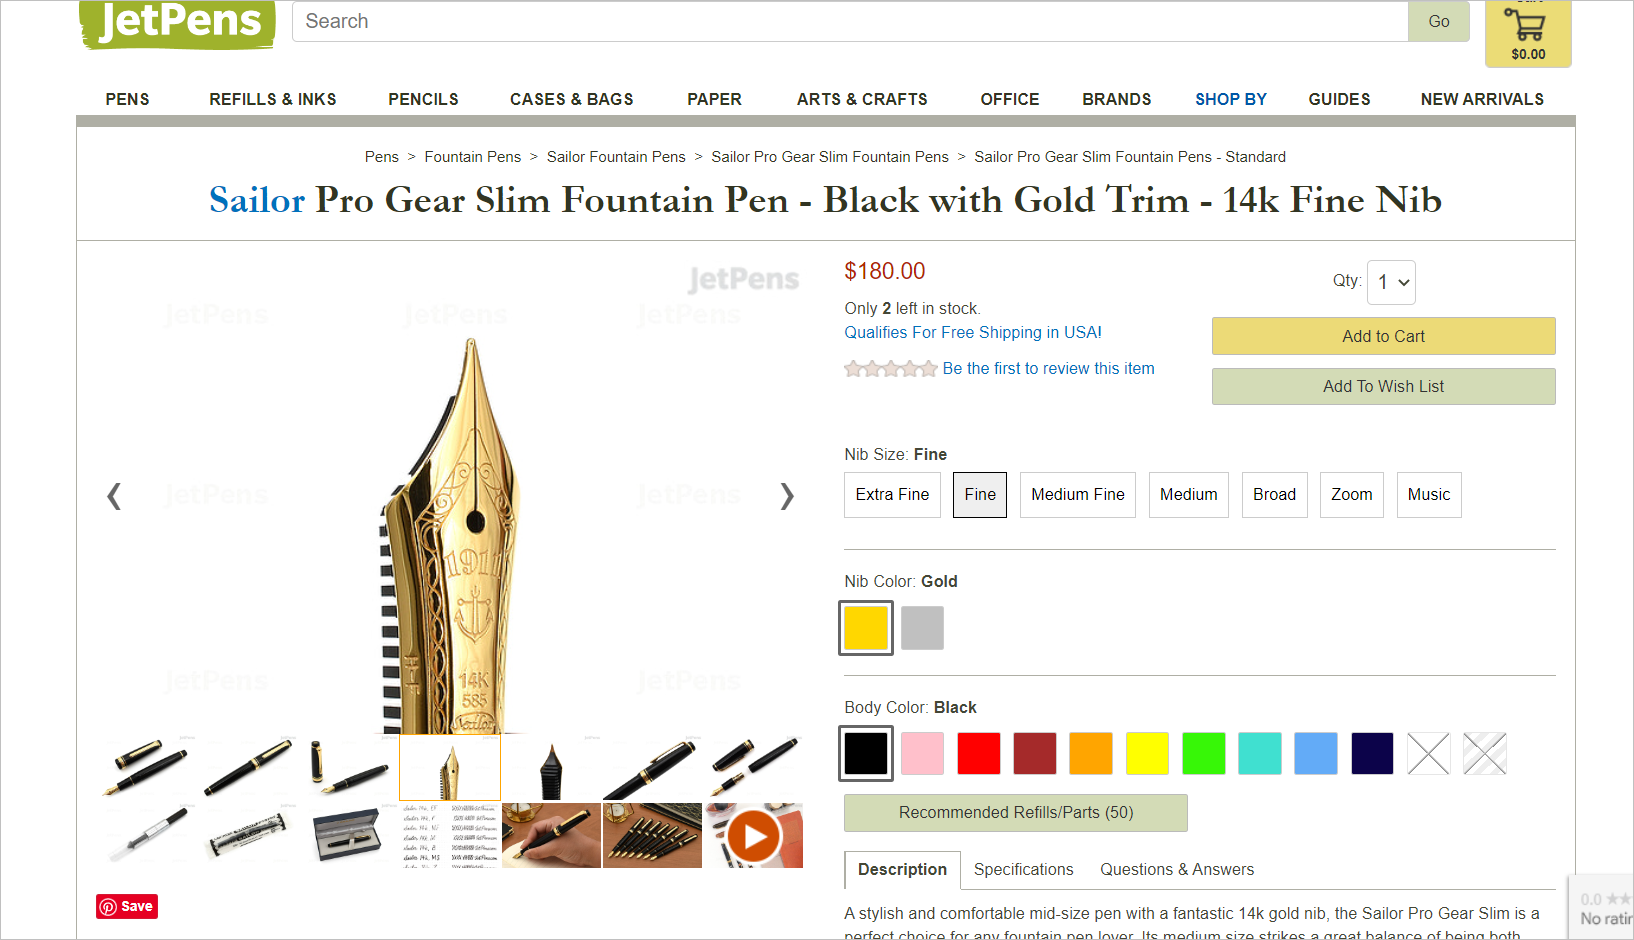 E-commerce product images best practice example. Product detail page with a close-up shot of a fountain pen nib.